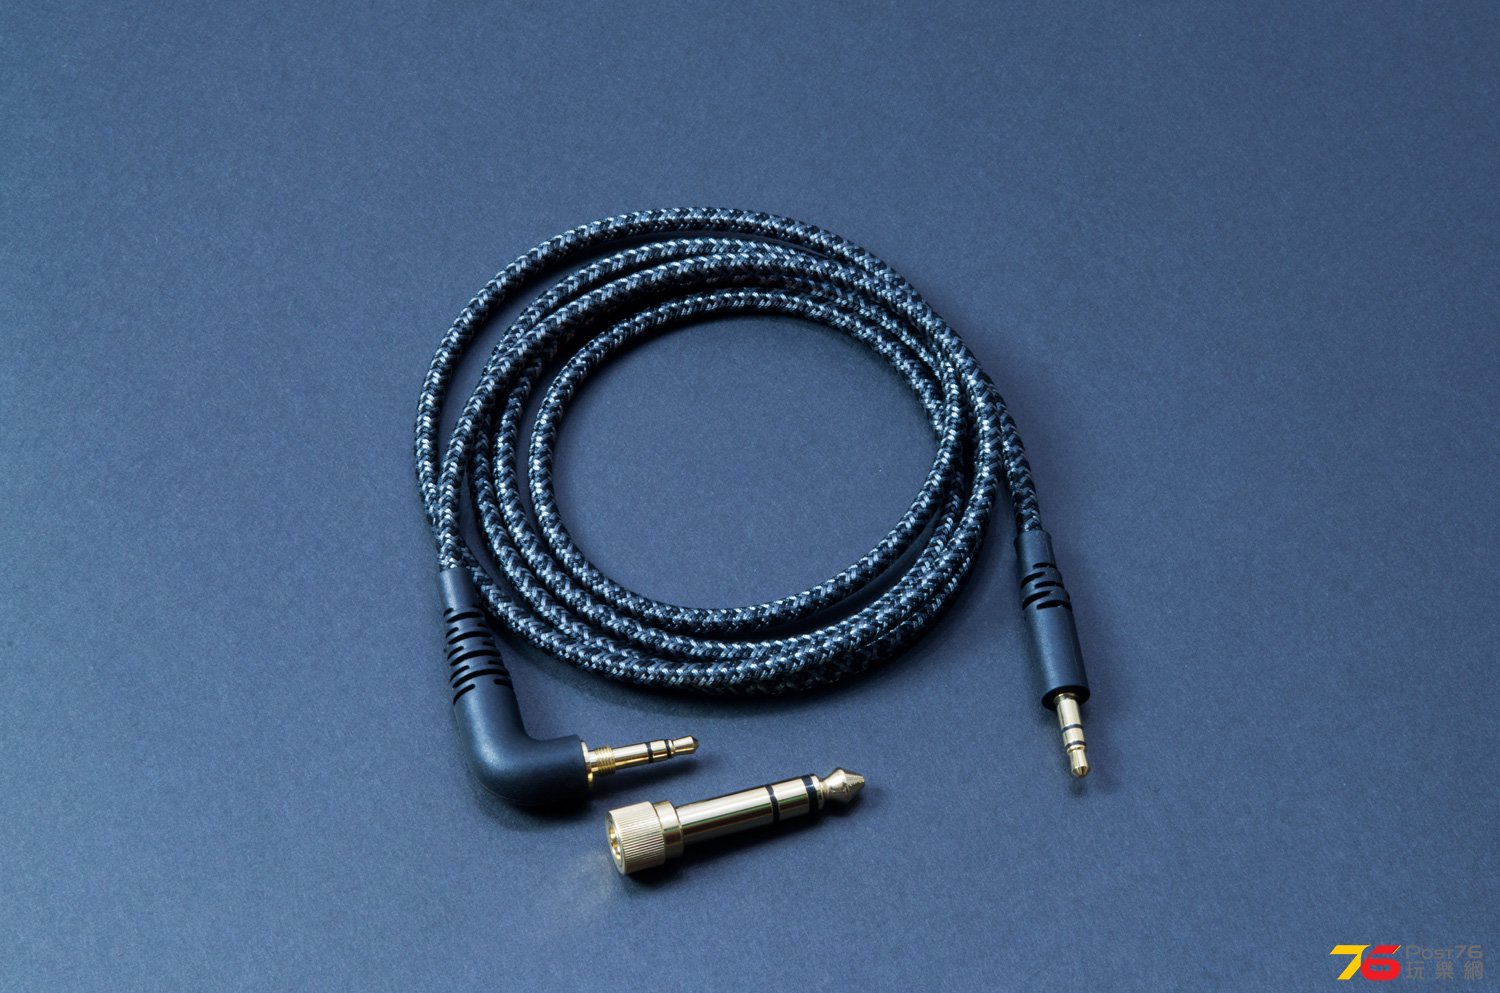 cable_02.jpg